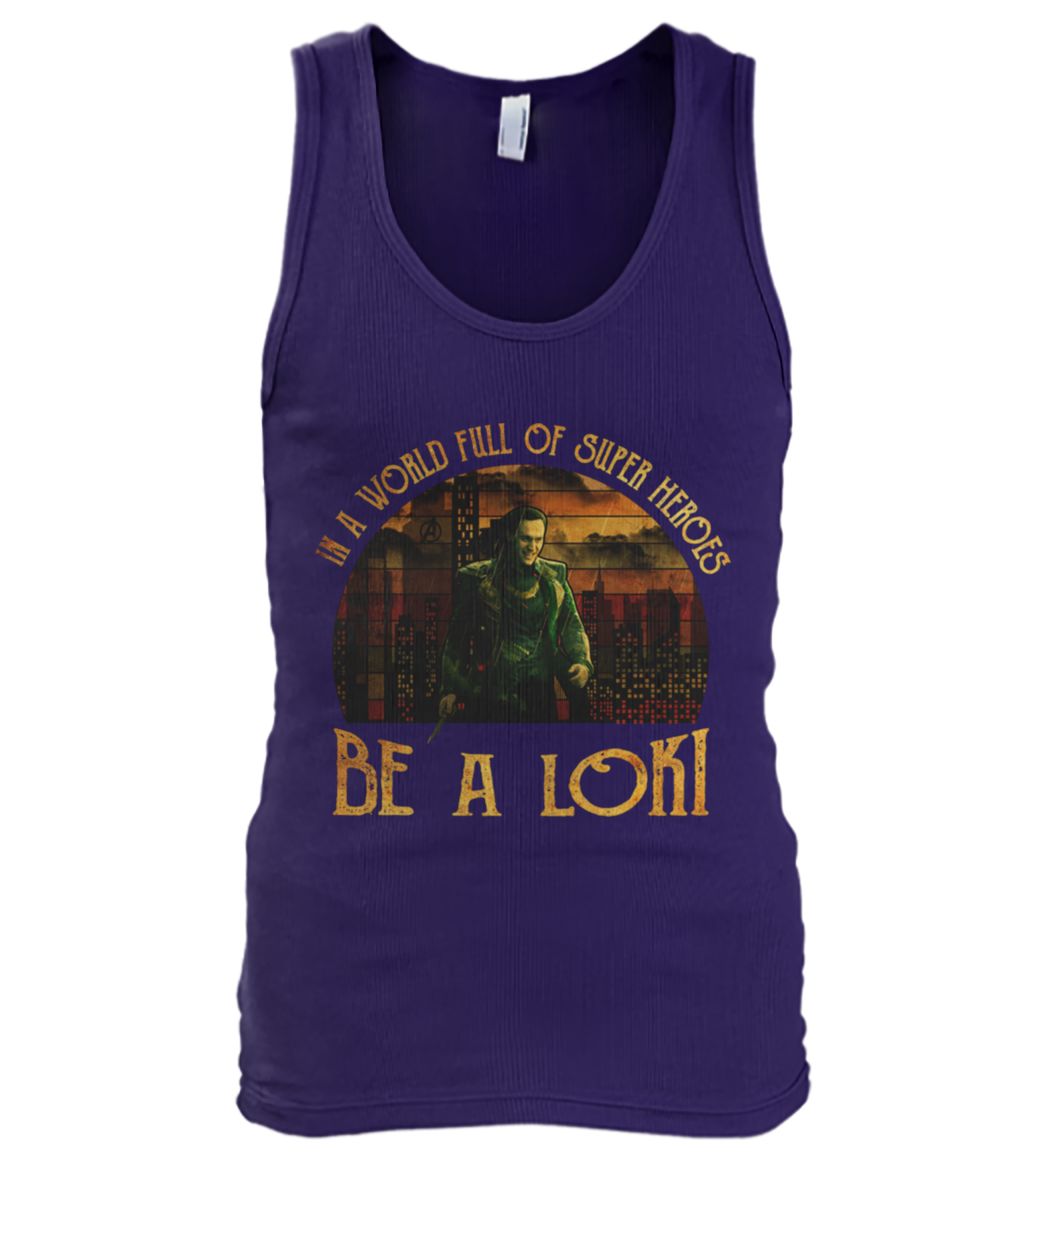 Vintage in a world full of super heroes be a loki men's tank top